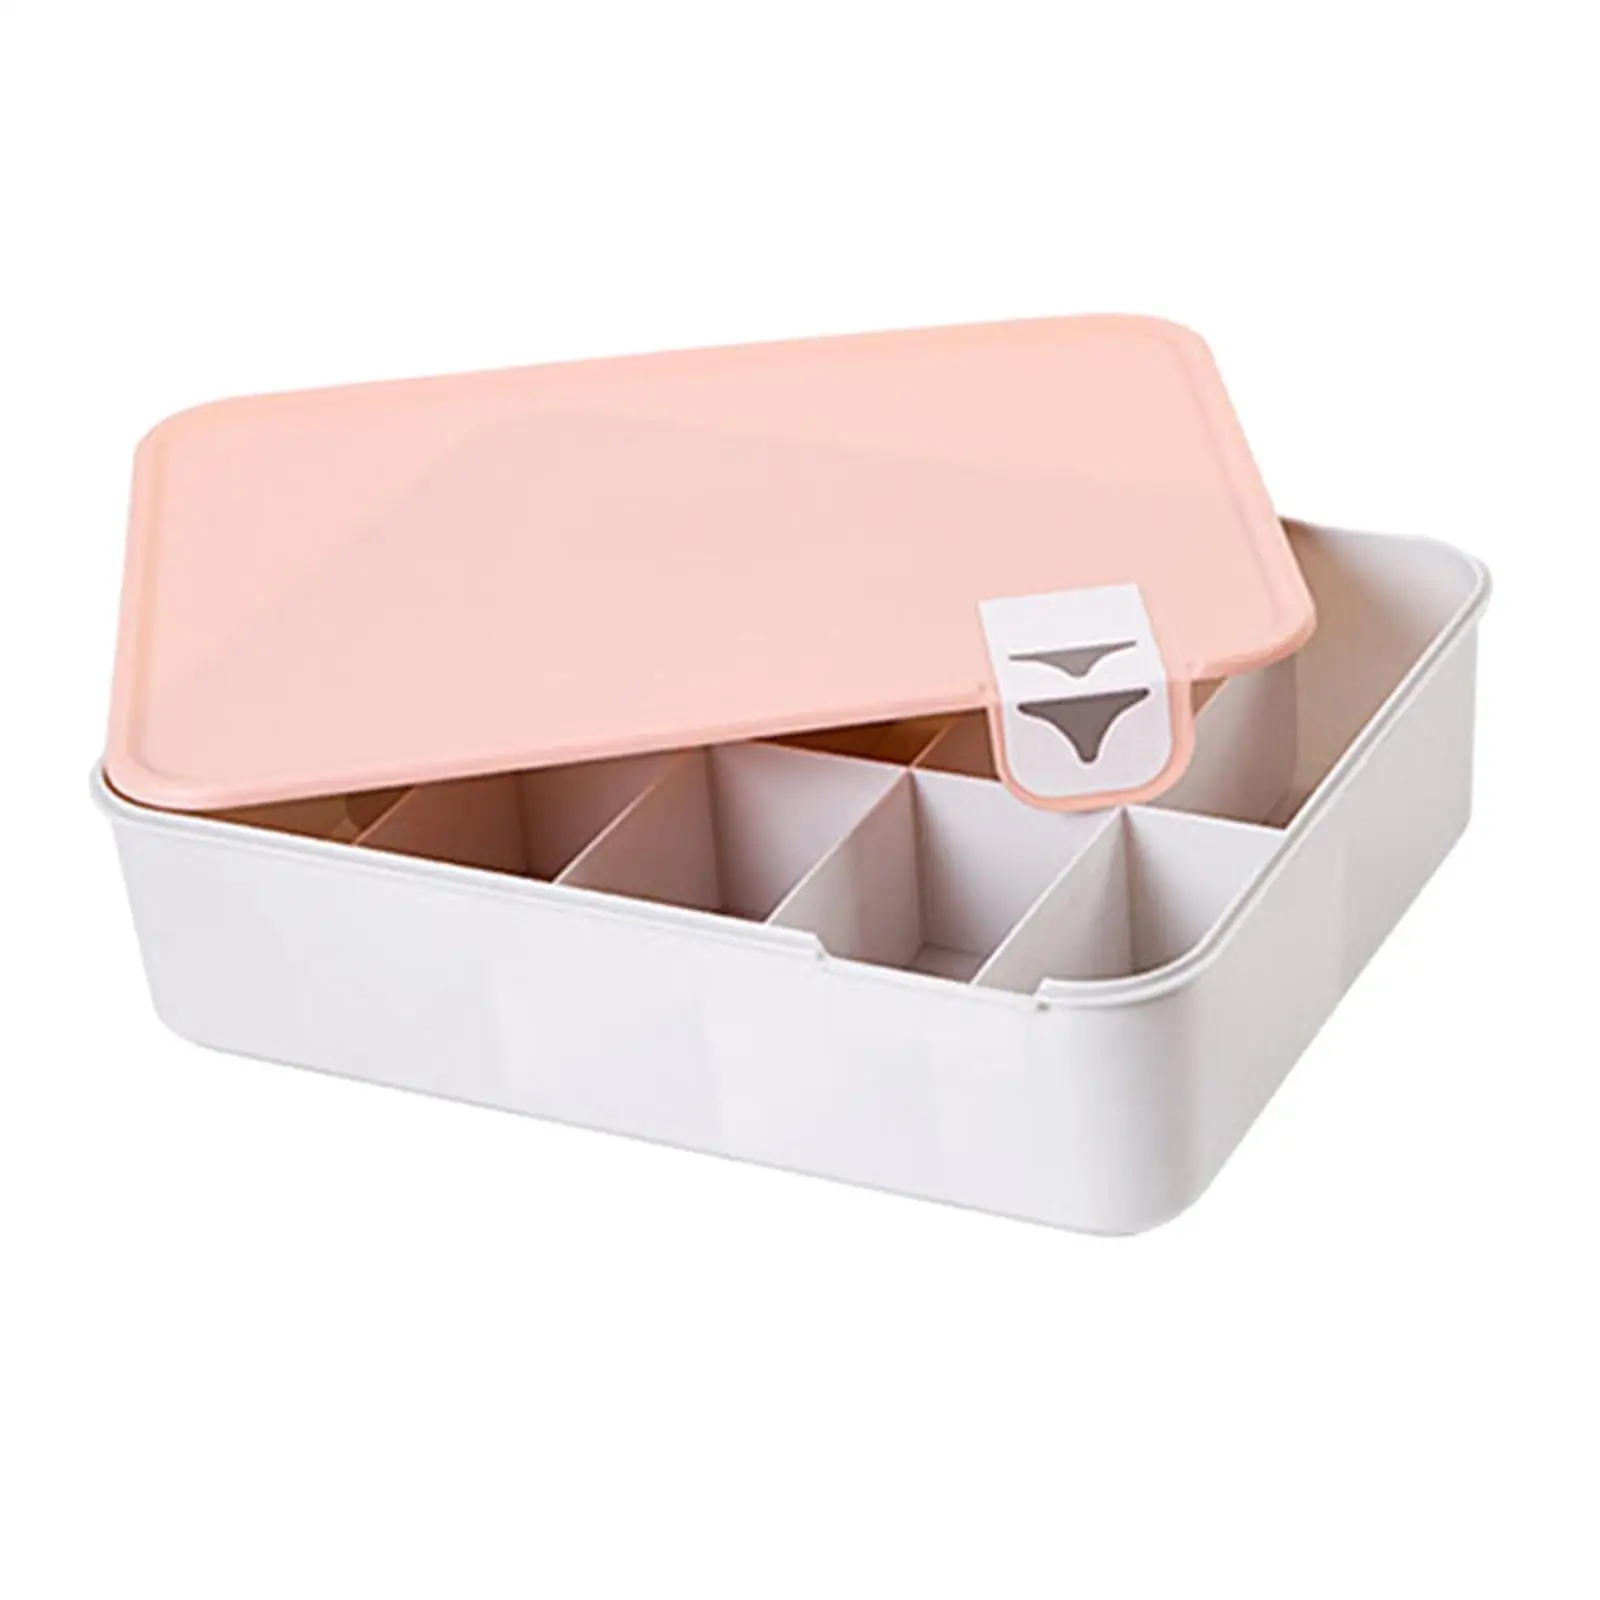 Drawer Organizer Clothes Storage Container Multipurpose Durable Storage Bin Dustproof Lid Cosmetic Organizer for Organizing